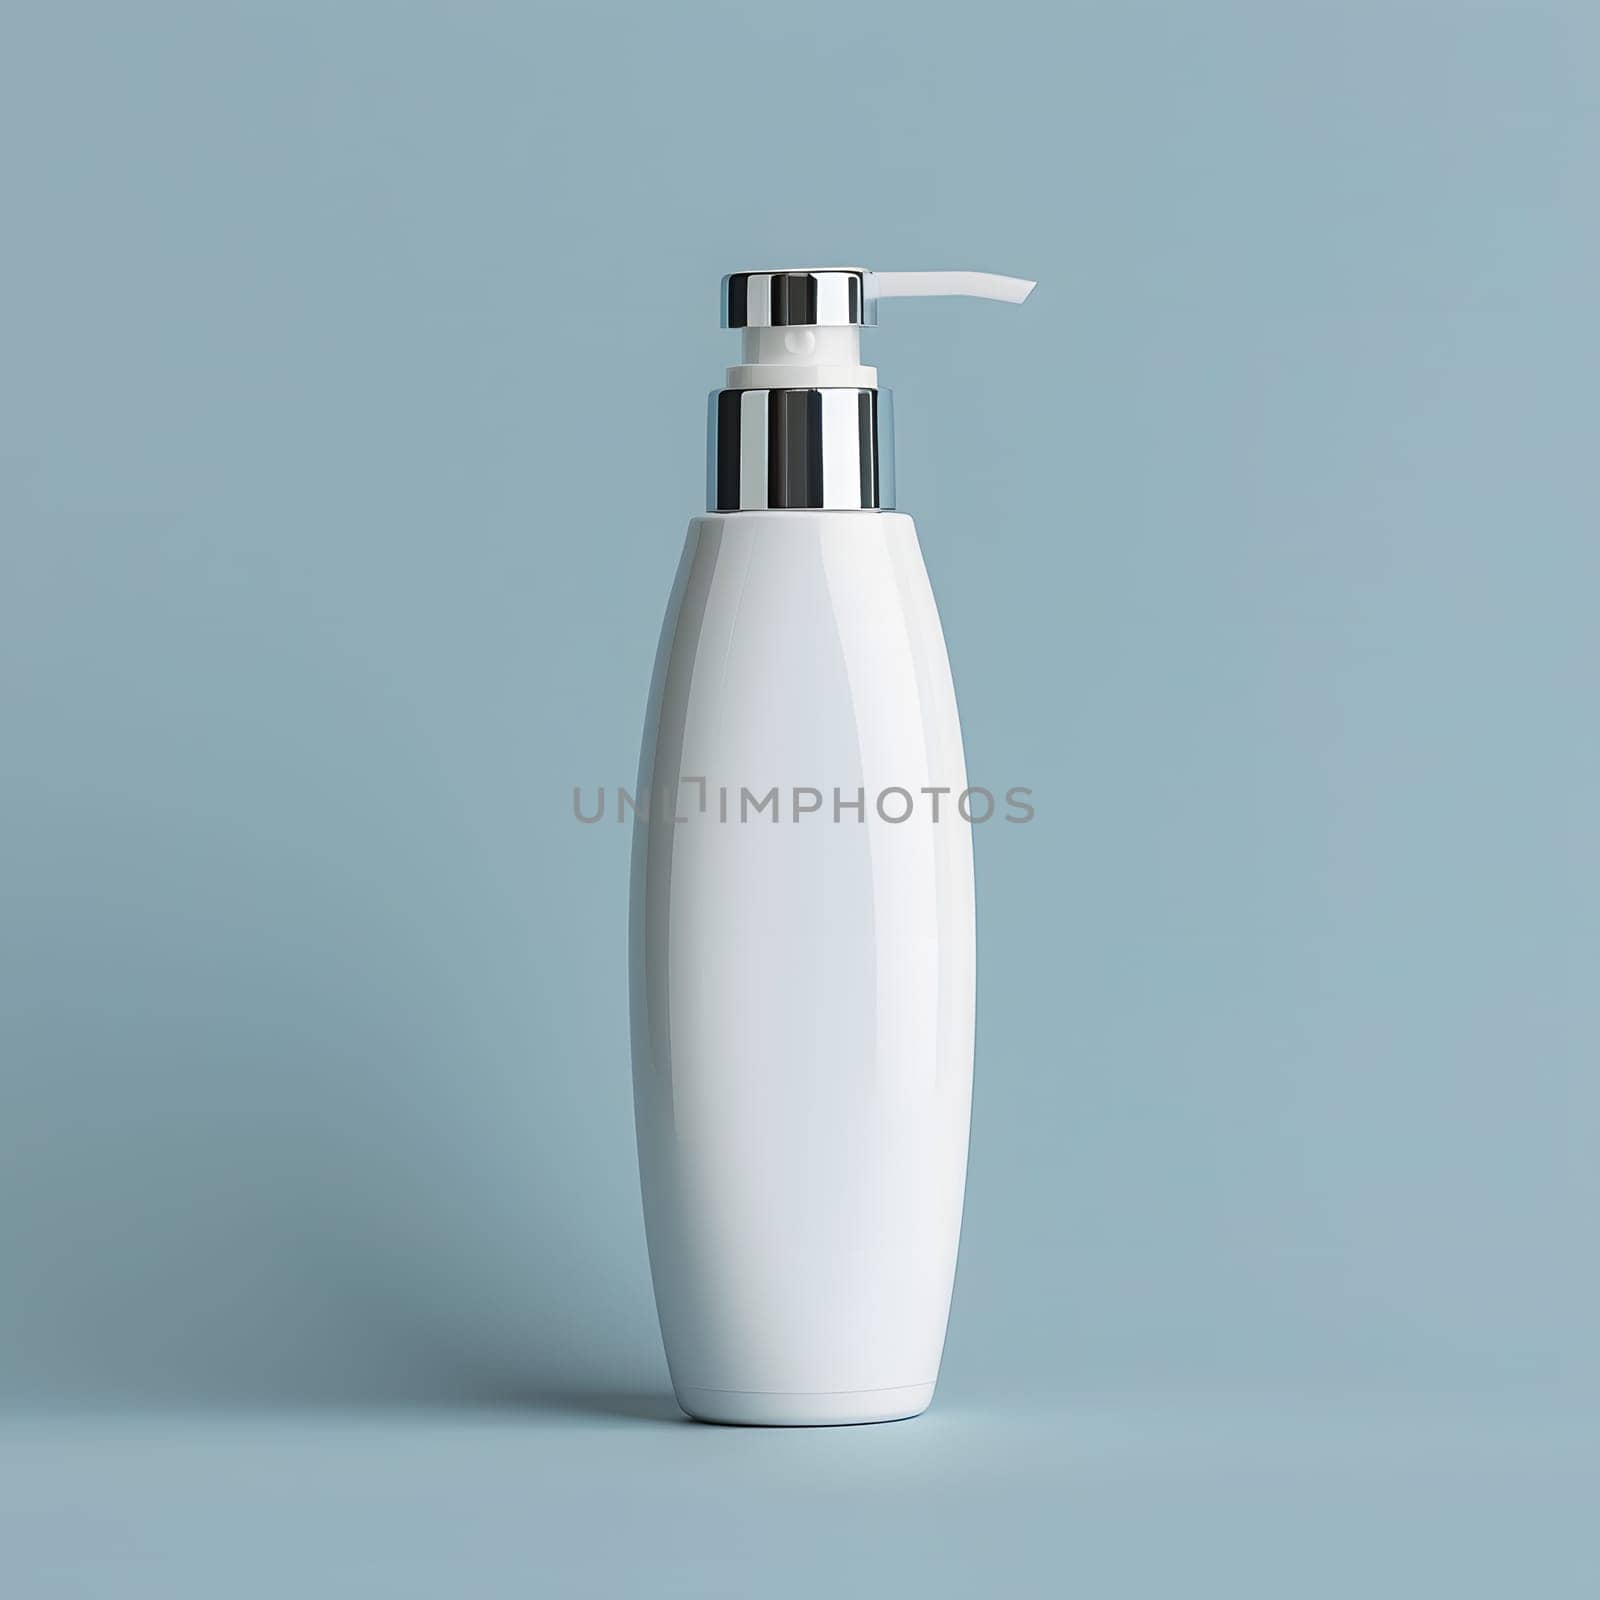 Silver pump on white plastic bottle against blue background by Nadtochiy